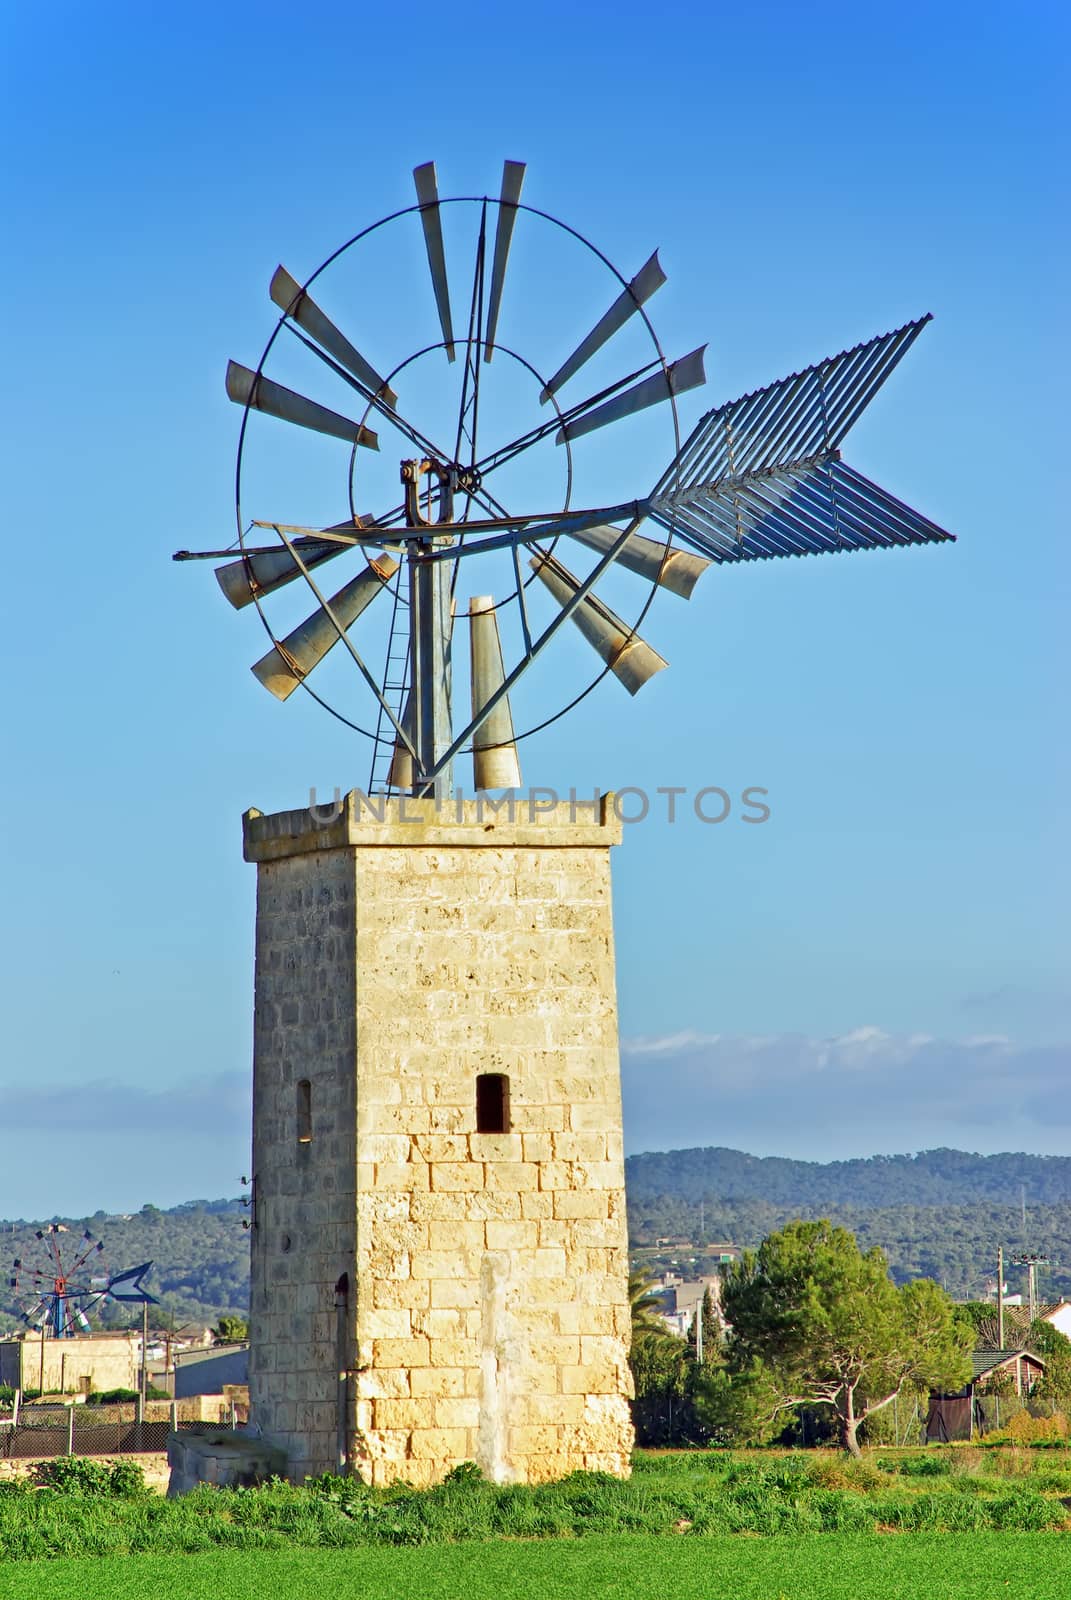 Typical windmill in the island of Majorca (Spain)